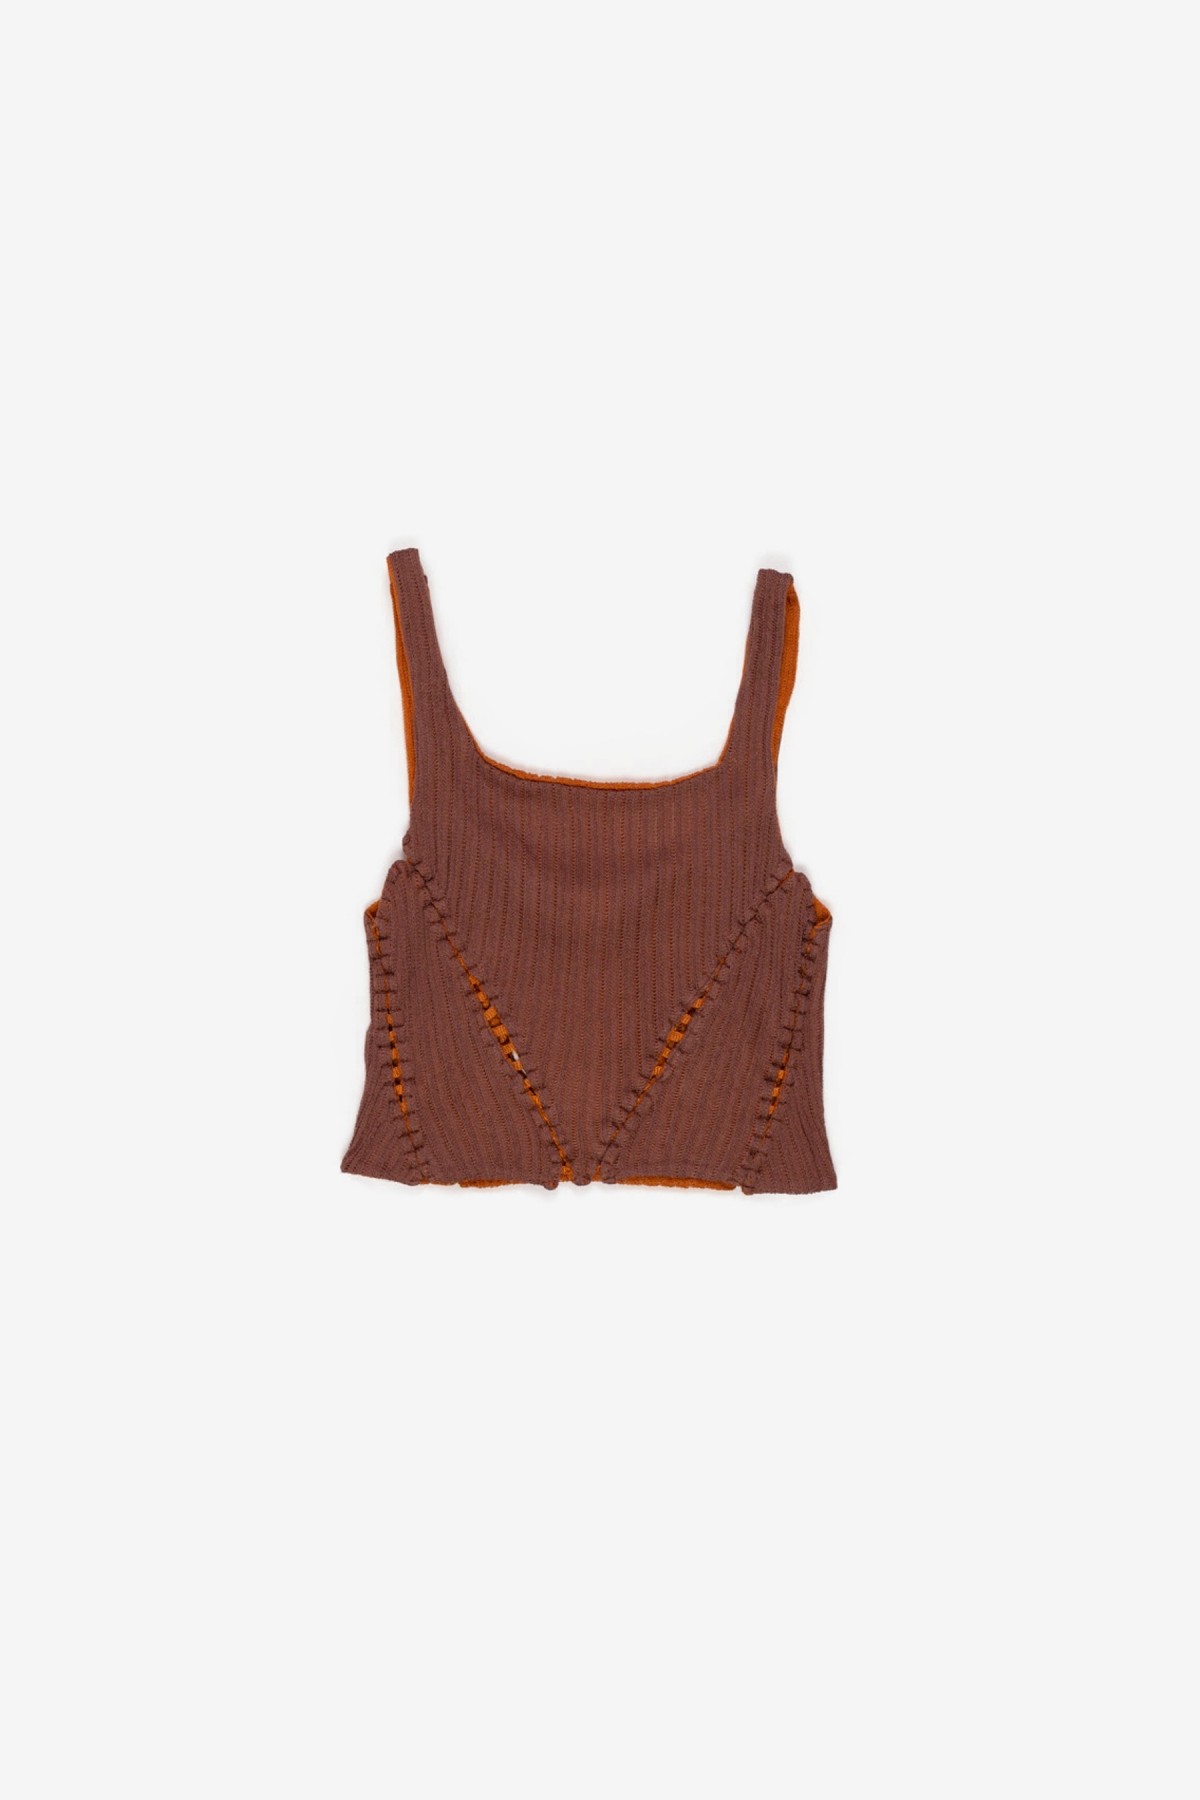 Isa Boulder Short Expandable Sleeveless Top in Coppersoil